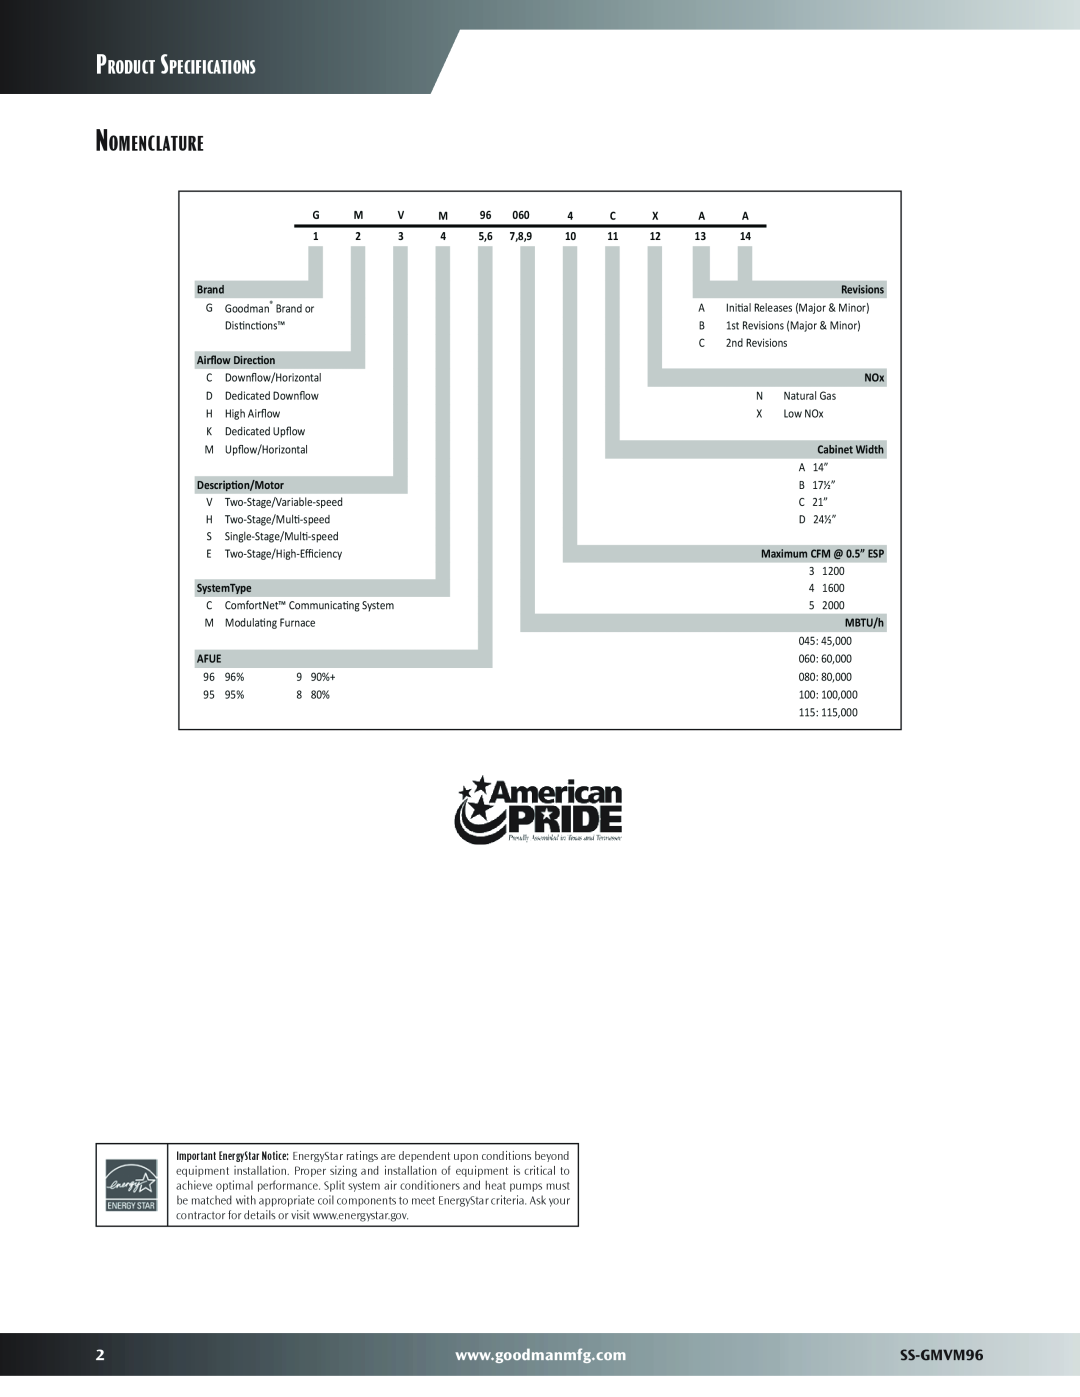 Goodman Mfg dimensions Nomenclature, Product Specifications, 7,8,9, AirﬂowDirec6on, SystemType, SS-GMVM96 